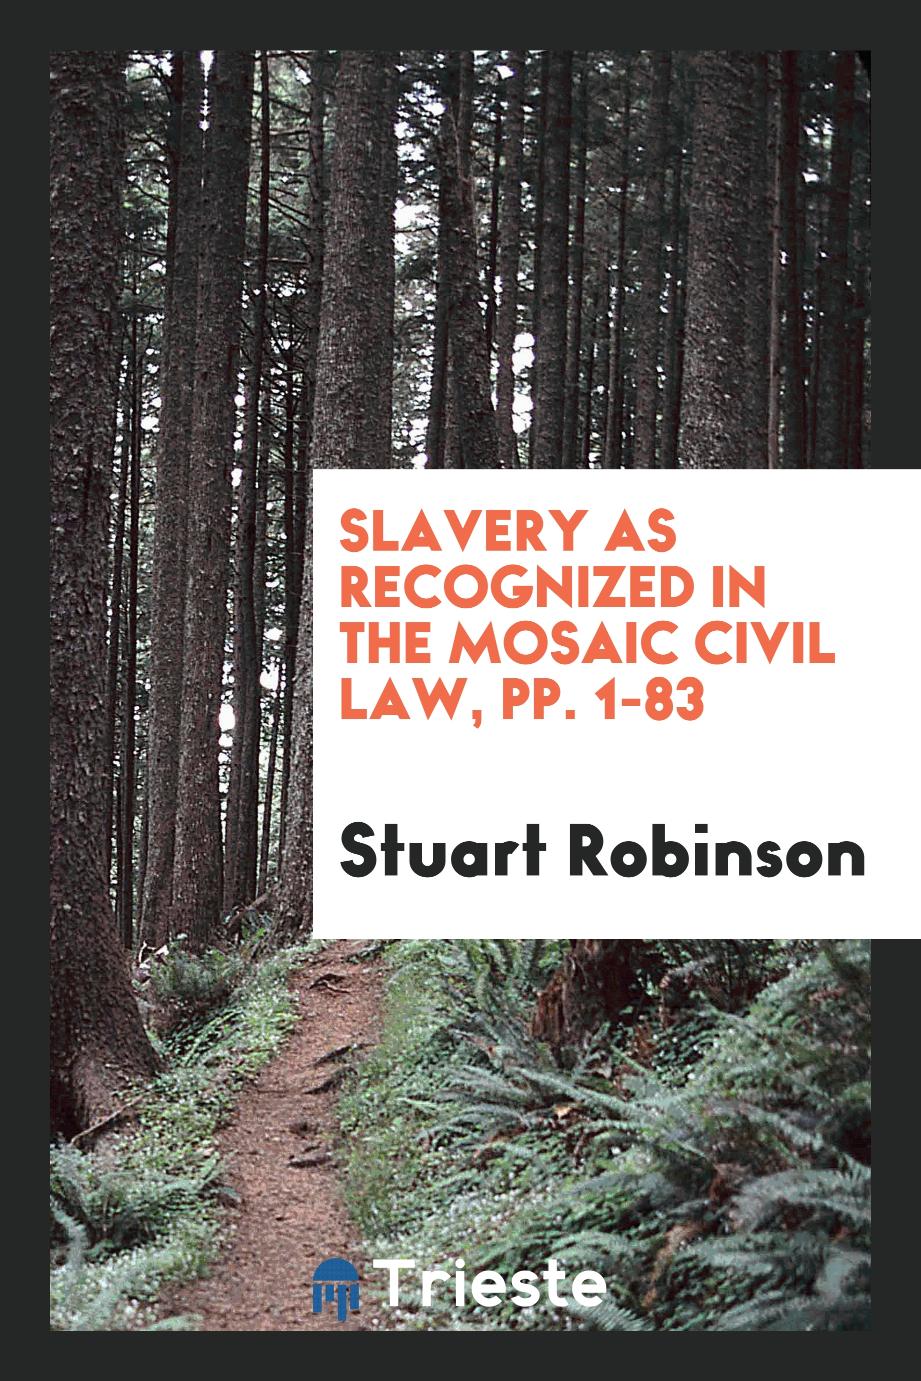 Slavery as Recognized in the Mosaic Civil Law, pp. 1-83